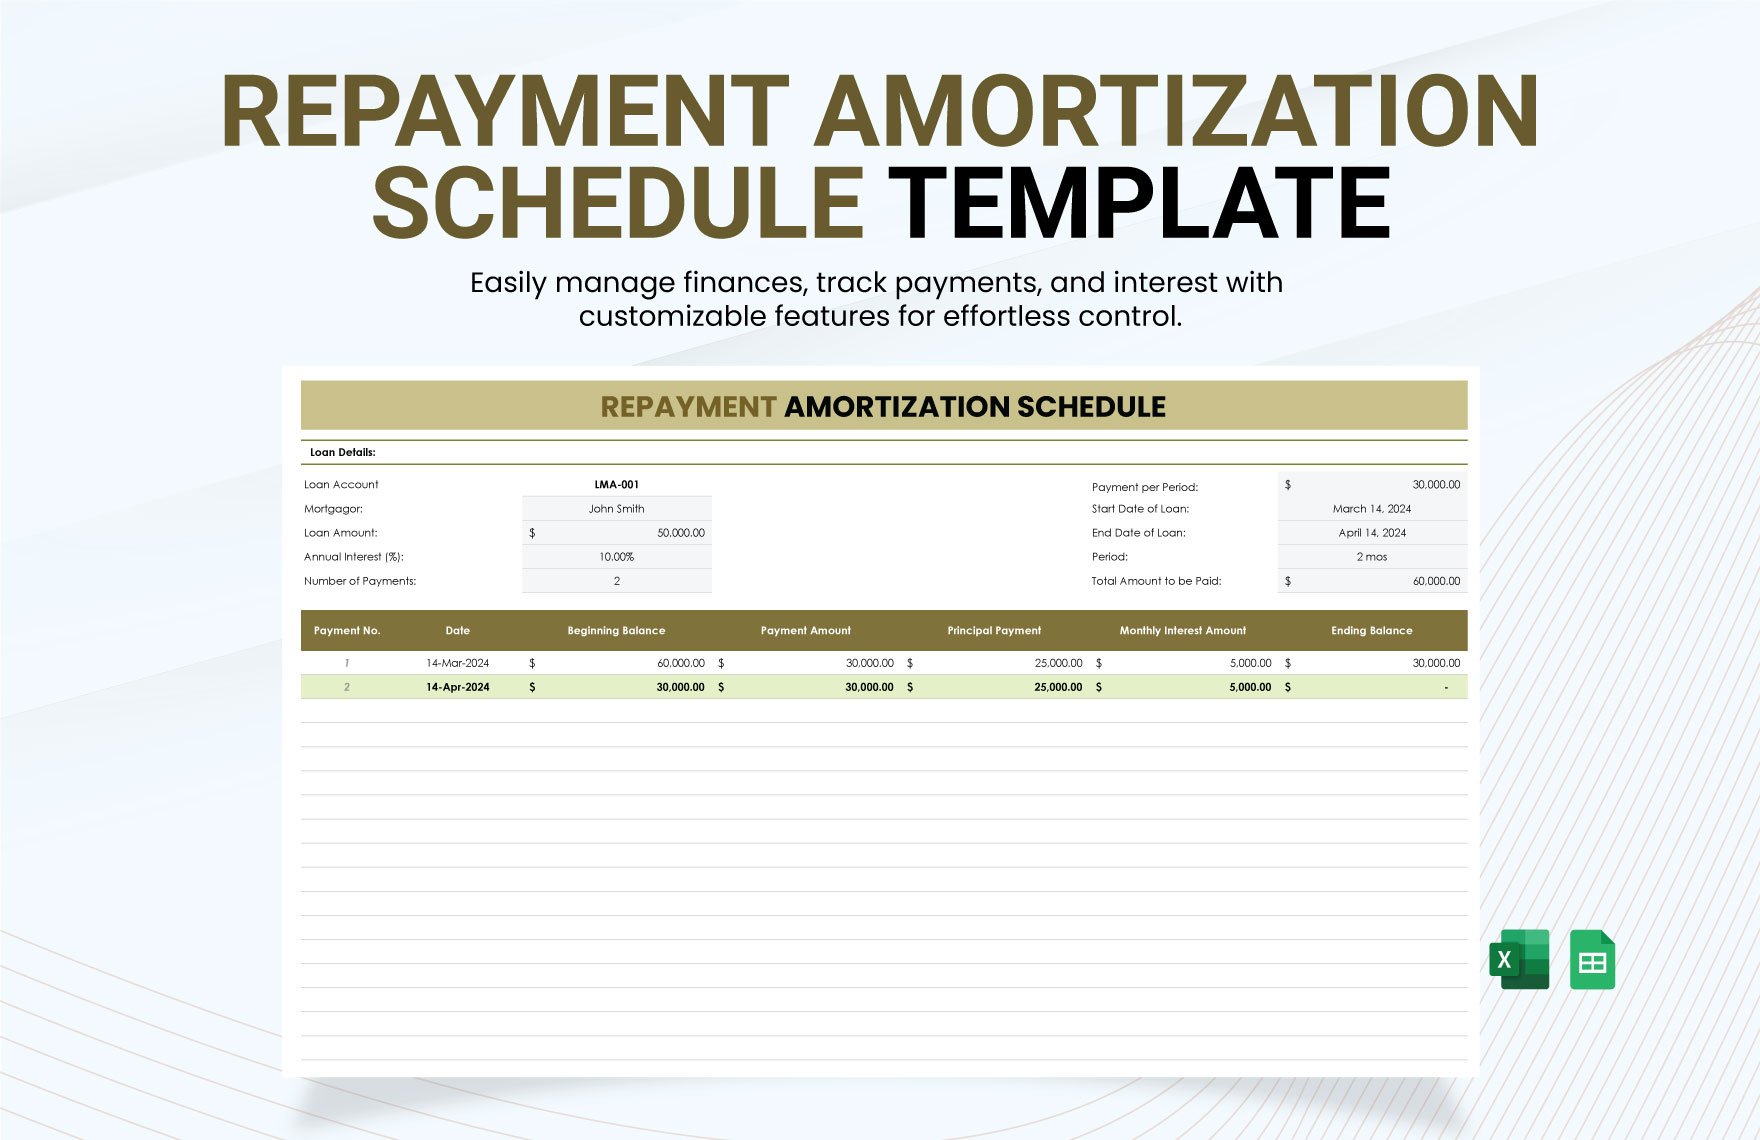 Repayment Amortization Schedule Template in Excel, Google Sheets